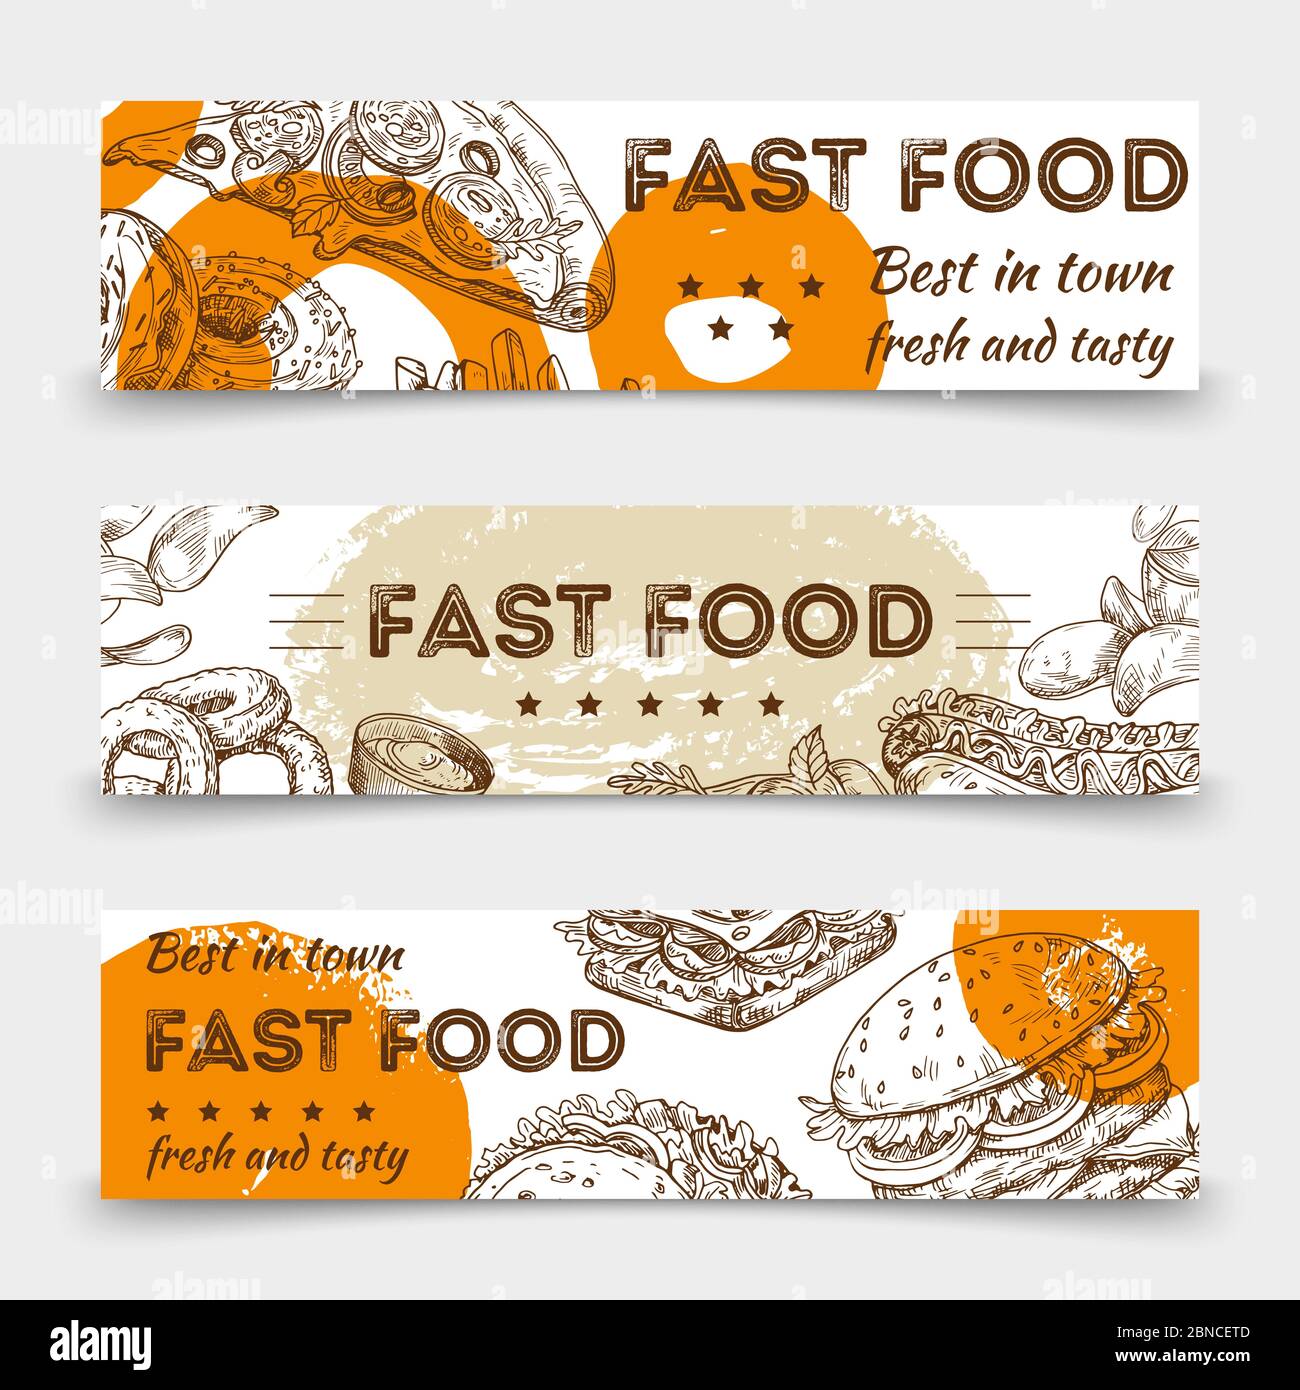 Sketched fast food vector banners template design. Illustration of sketched fast food and snack sketch, hamburger and sandwich Stock Vector